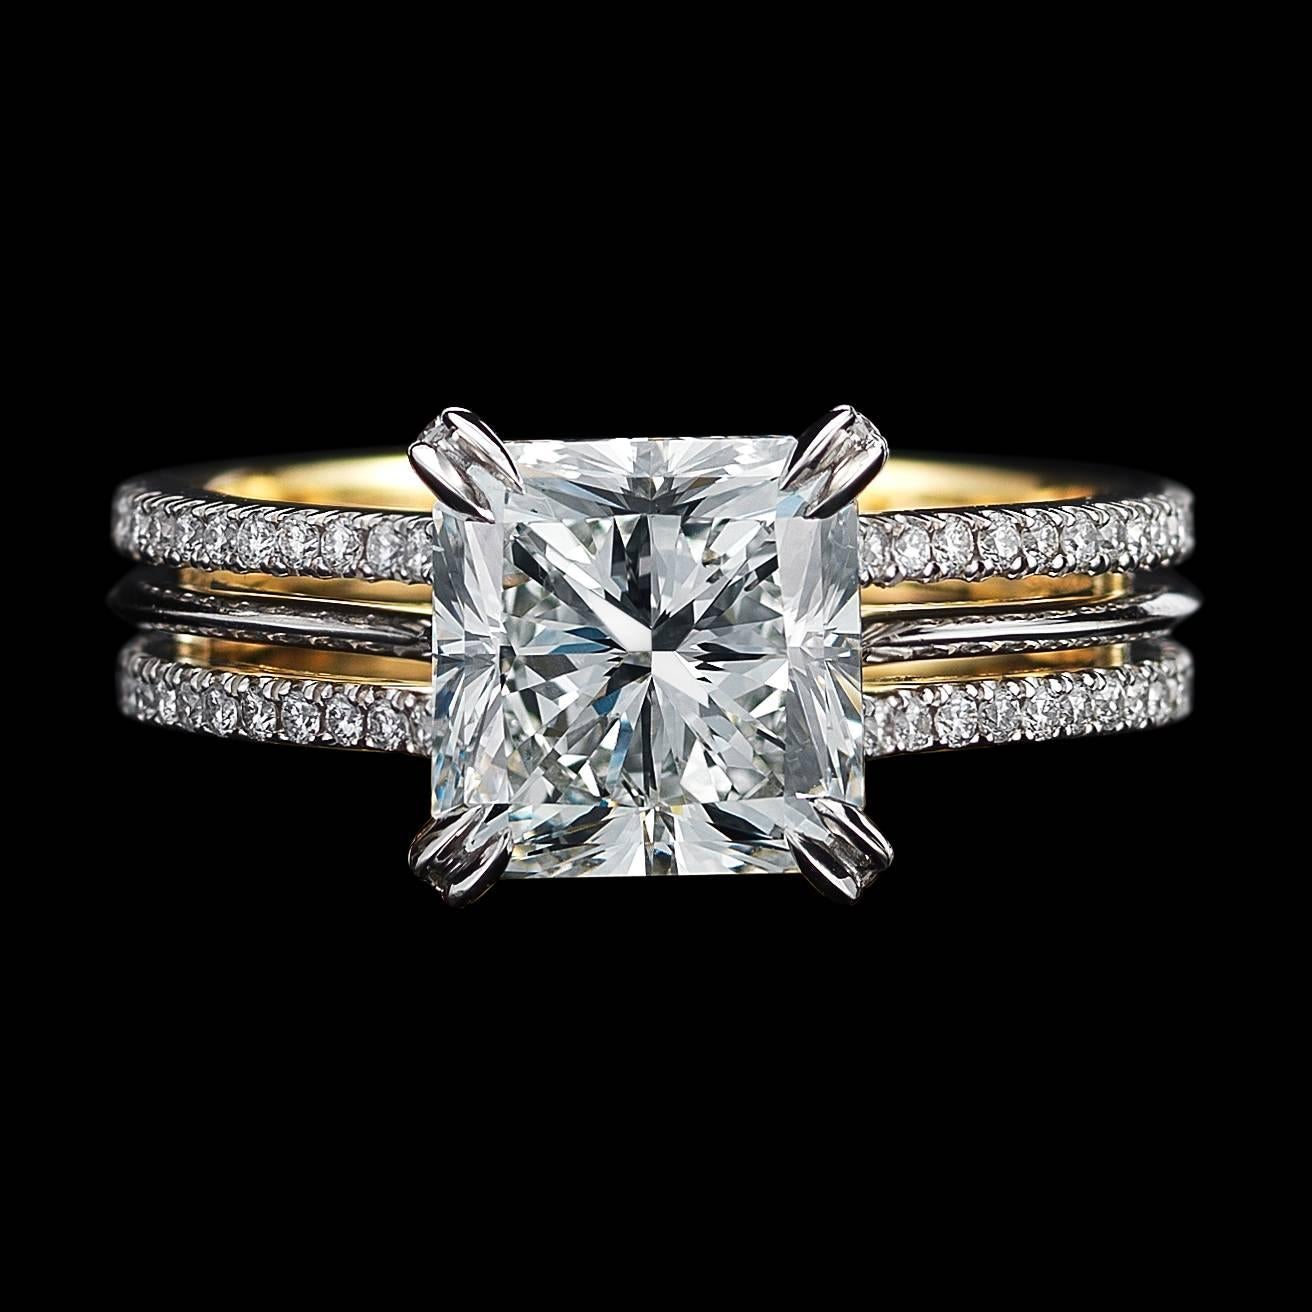 *This design is available with center diamonds weighing from 1ct - 10 cts and larger. Please contact us for more information on this piece or on creating your own custom Alexandra Mor Design.  

An Alexandra Mor ring featuring a 3.00 Ct G VS1 GIA